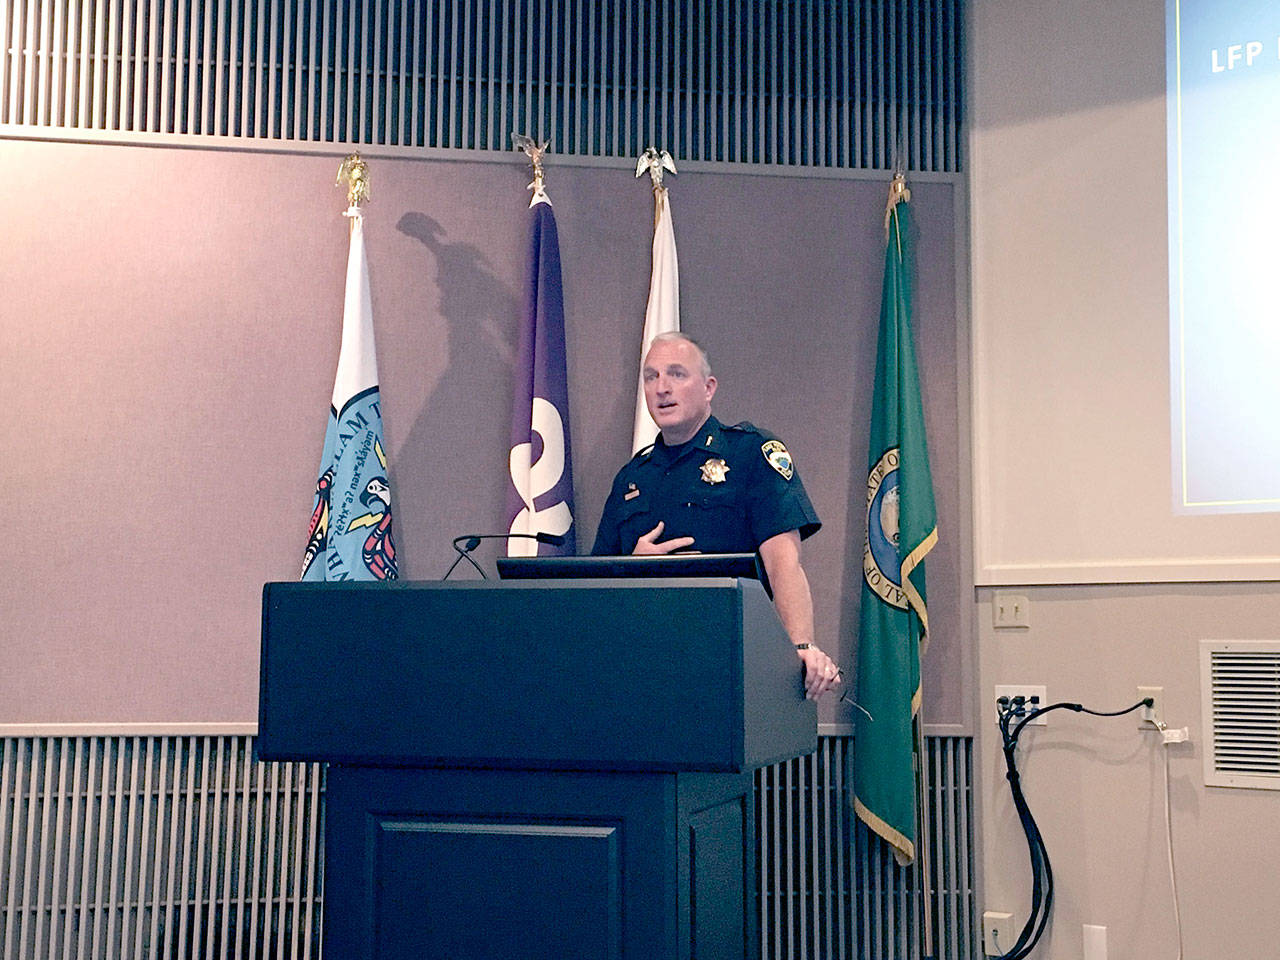 Lake Forest Park Police Chief Steve Sutton explains the traffic safety camera/photo enforcement system used in his city at the Port Angeles City Council meeting Tuesday. (Rob Ollikainen/Peninsula Daily News)